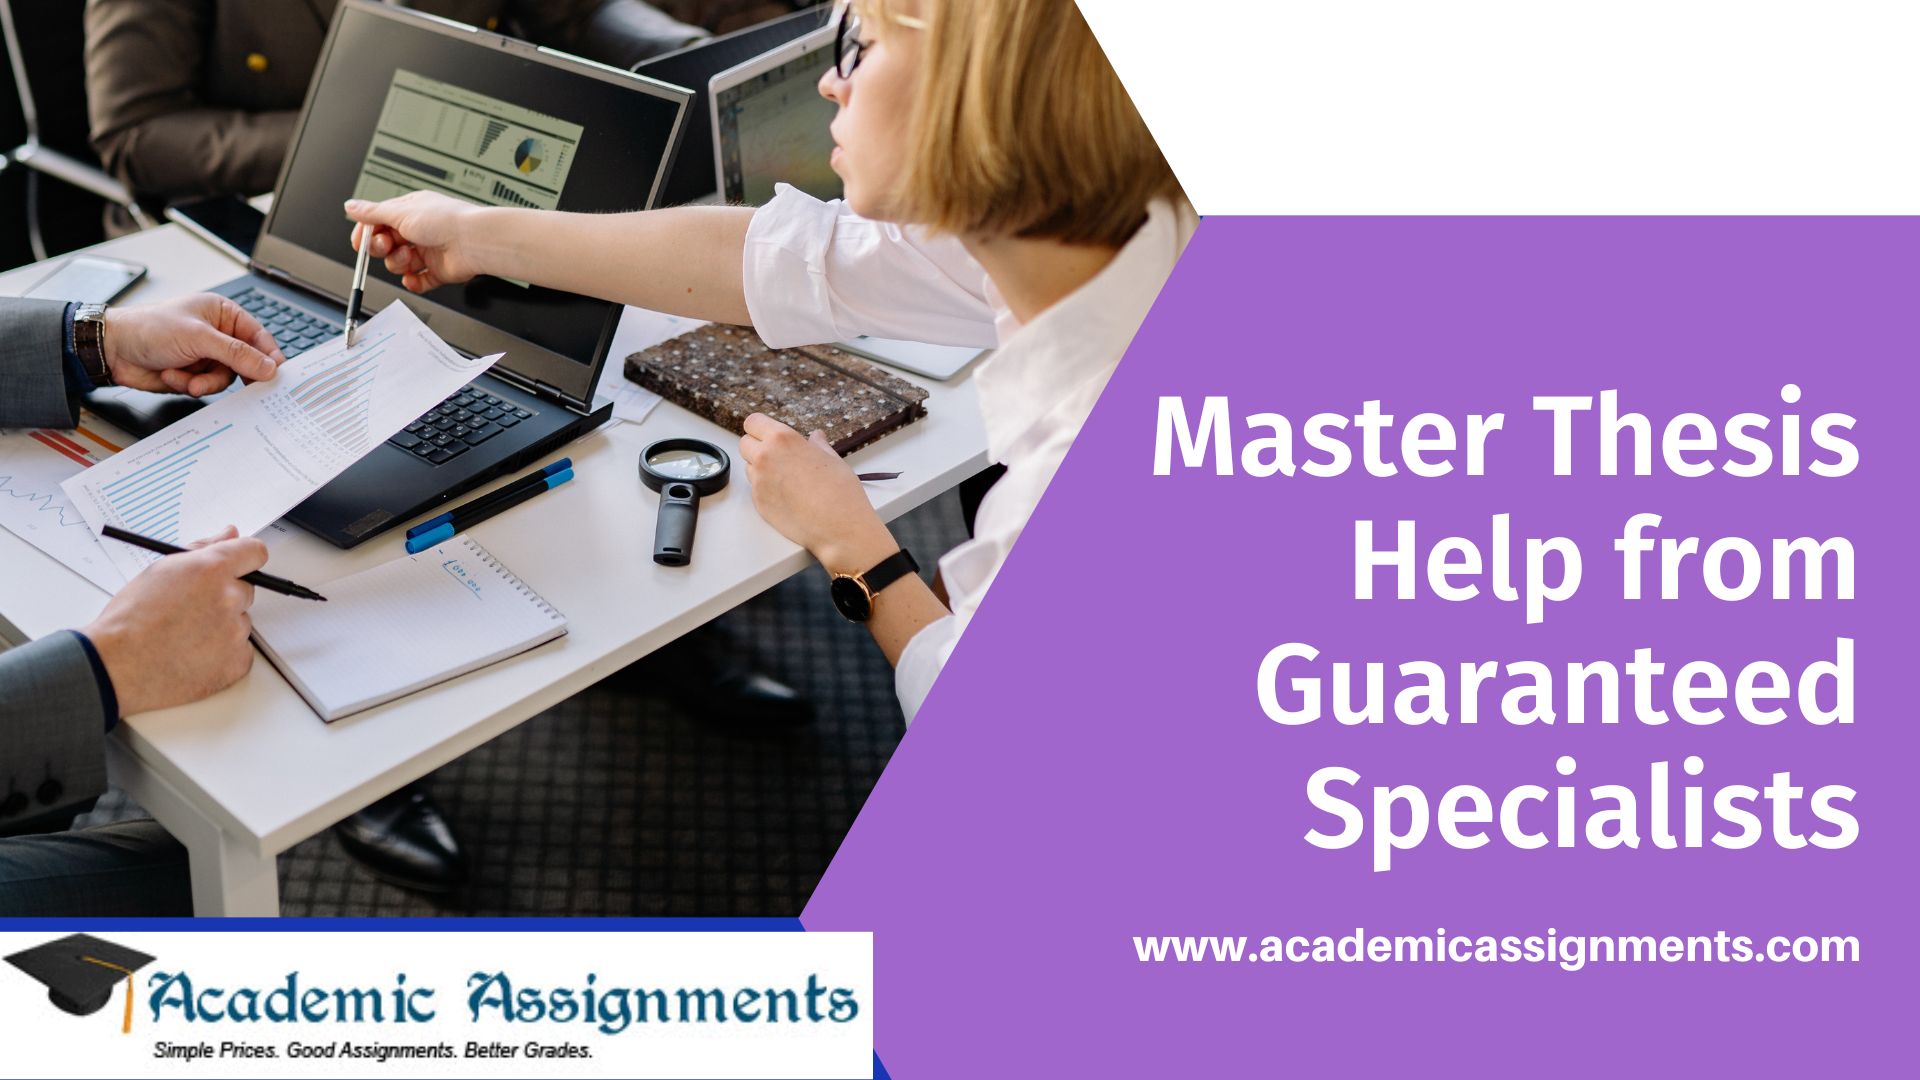 Master Thesis Help from Guaranteed Specialists